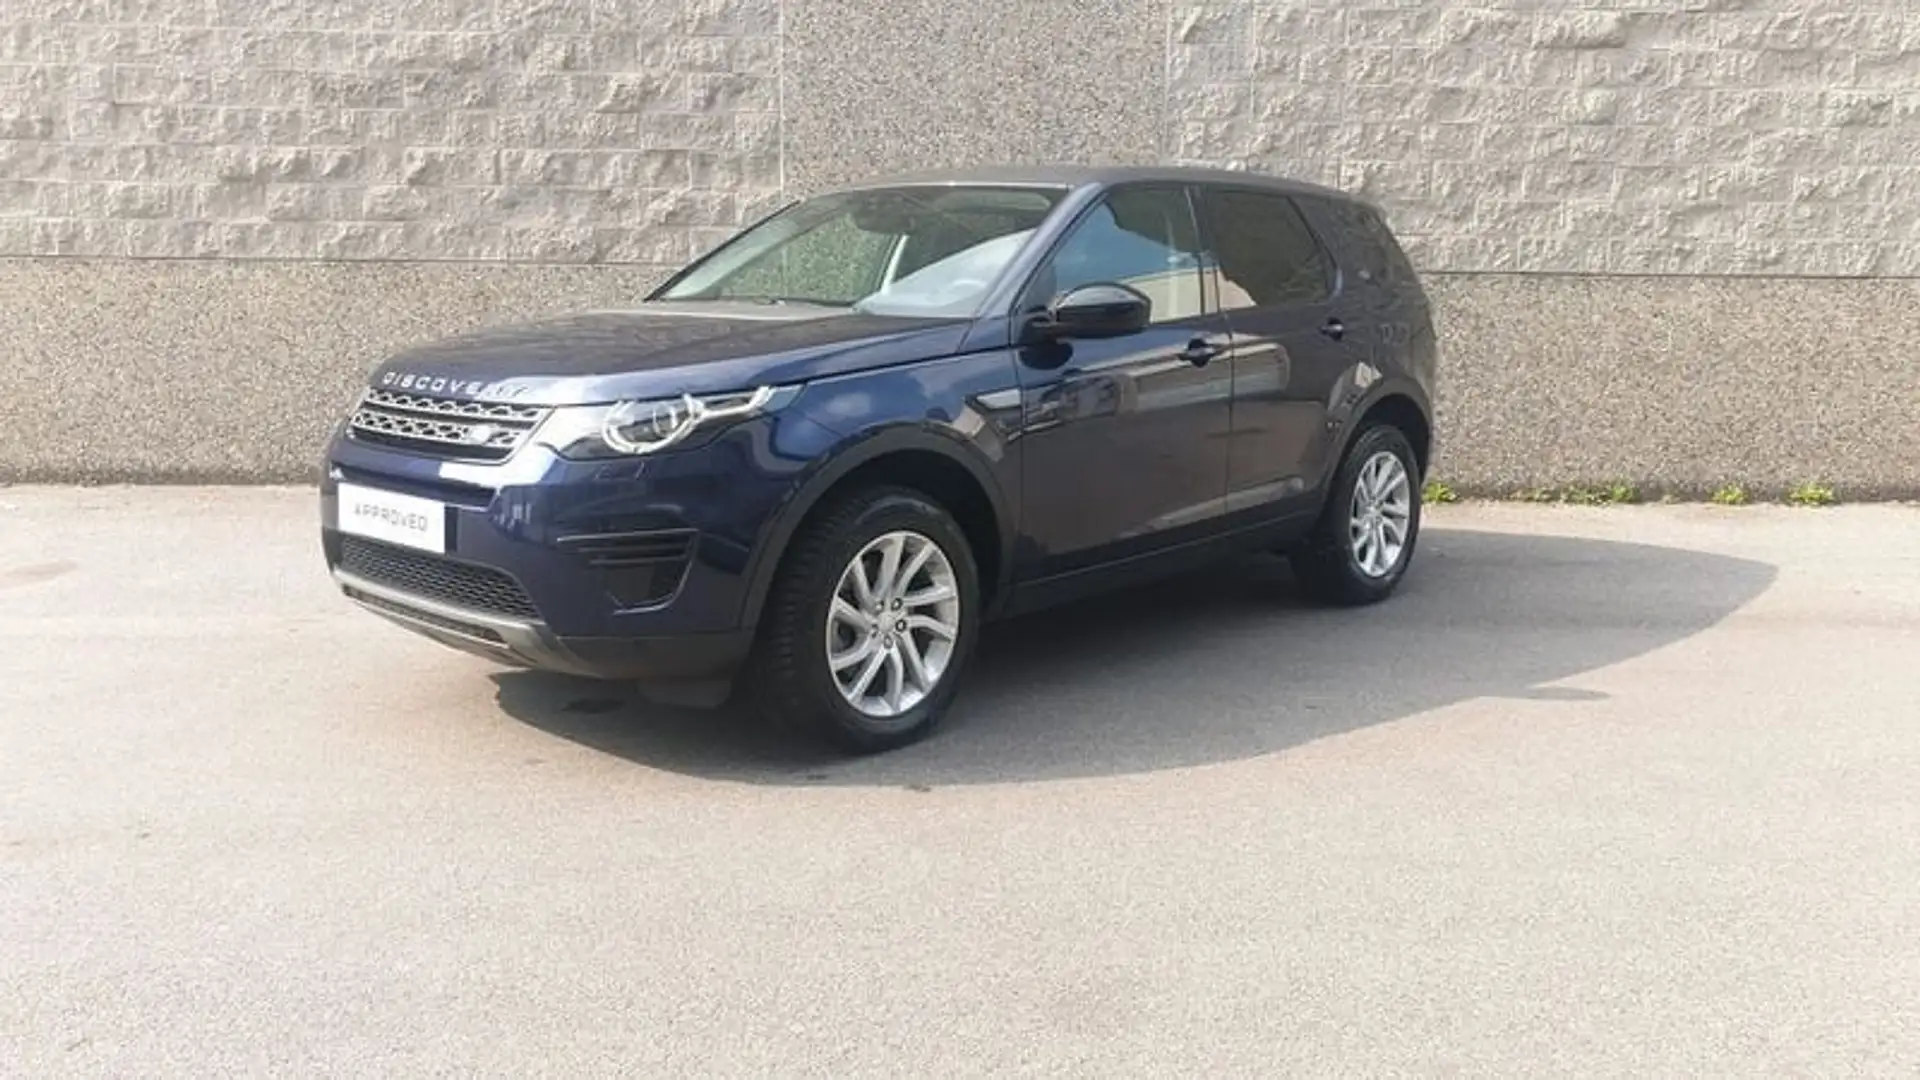 Land Rover Discovery Sport 2.0 TD4 150 CV Auto Business EDITION SE TETTO PAN Blauw - 1